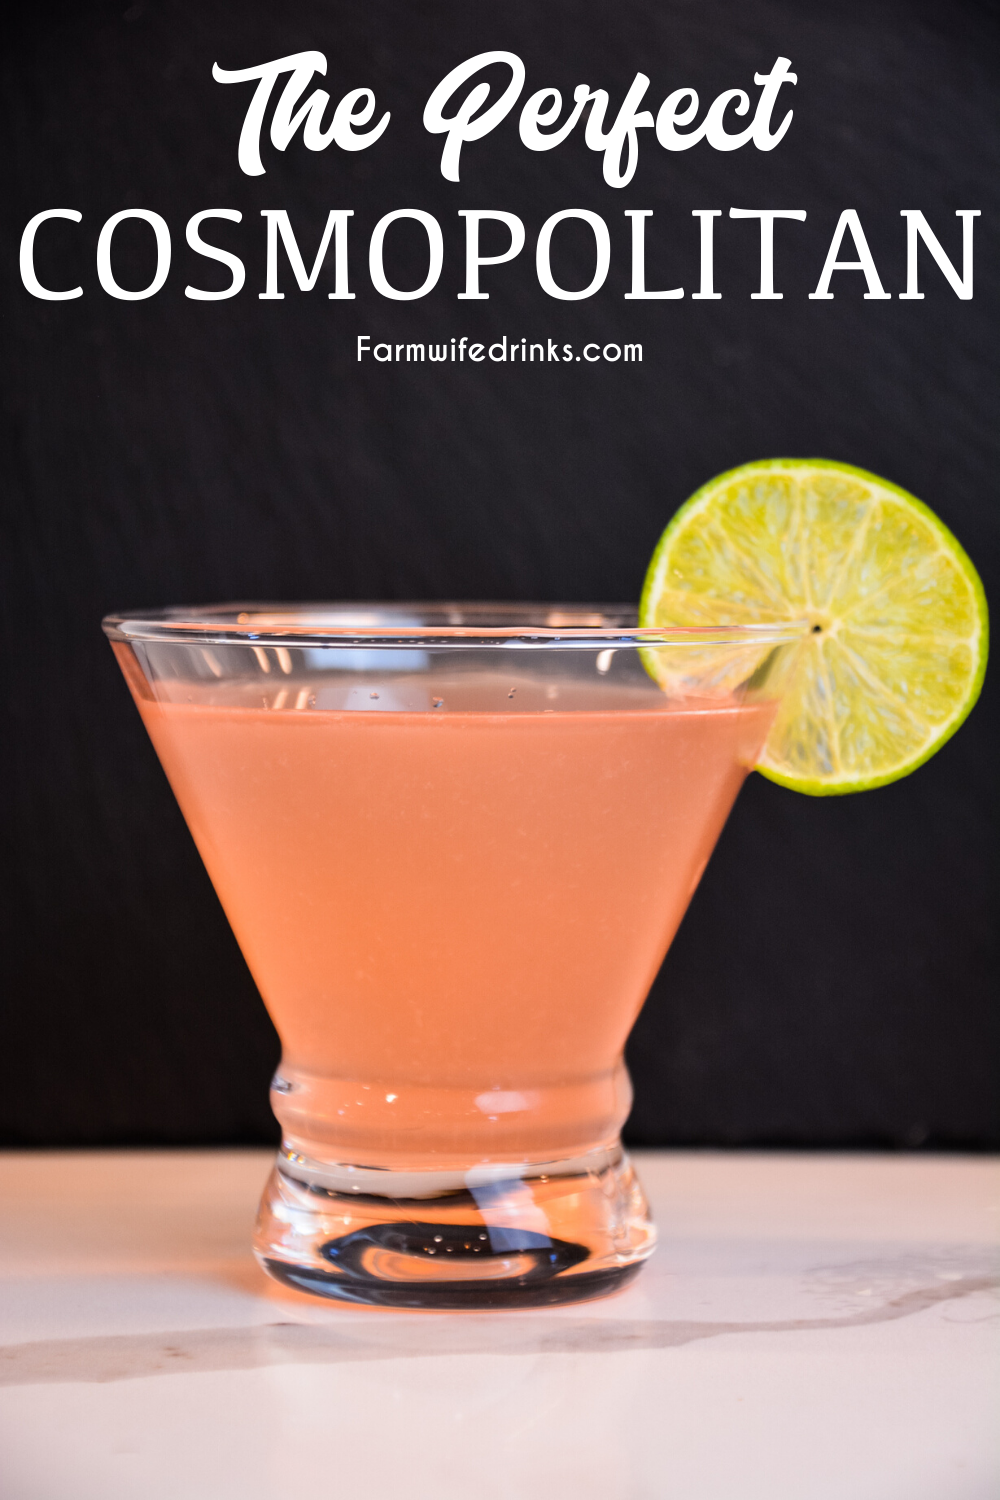 The Cosmopolitan martini is the sweet and sour combination of vodka, Cointreau, cranberry juice, and lime juice shaken to make the perfect cosmo cocktail.